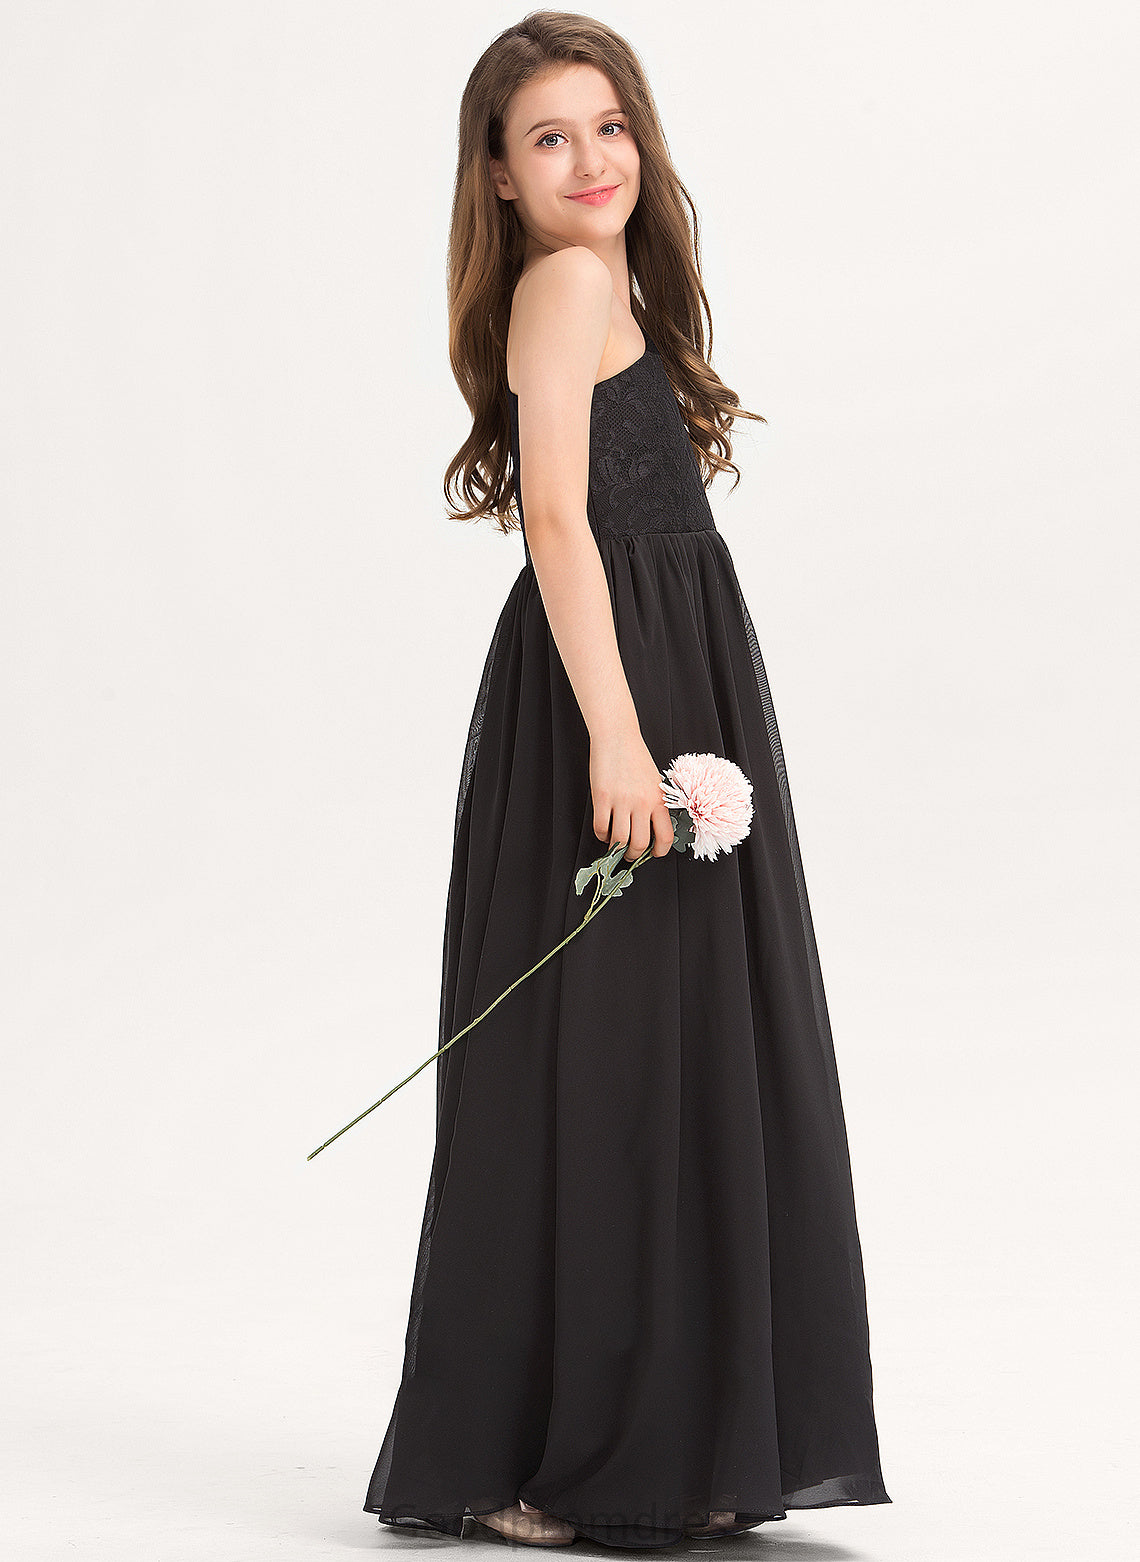 Aaliyah Lace Floor-Length Junior Bridesmaid Dresses Chiffon One-Shoulder A-Line